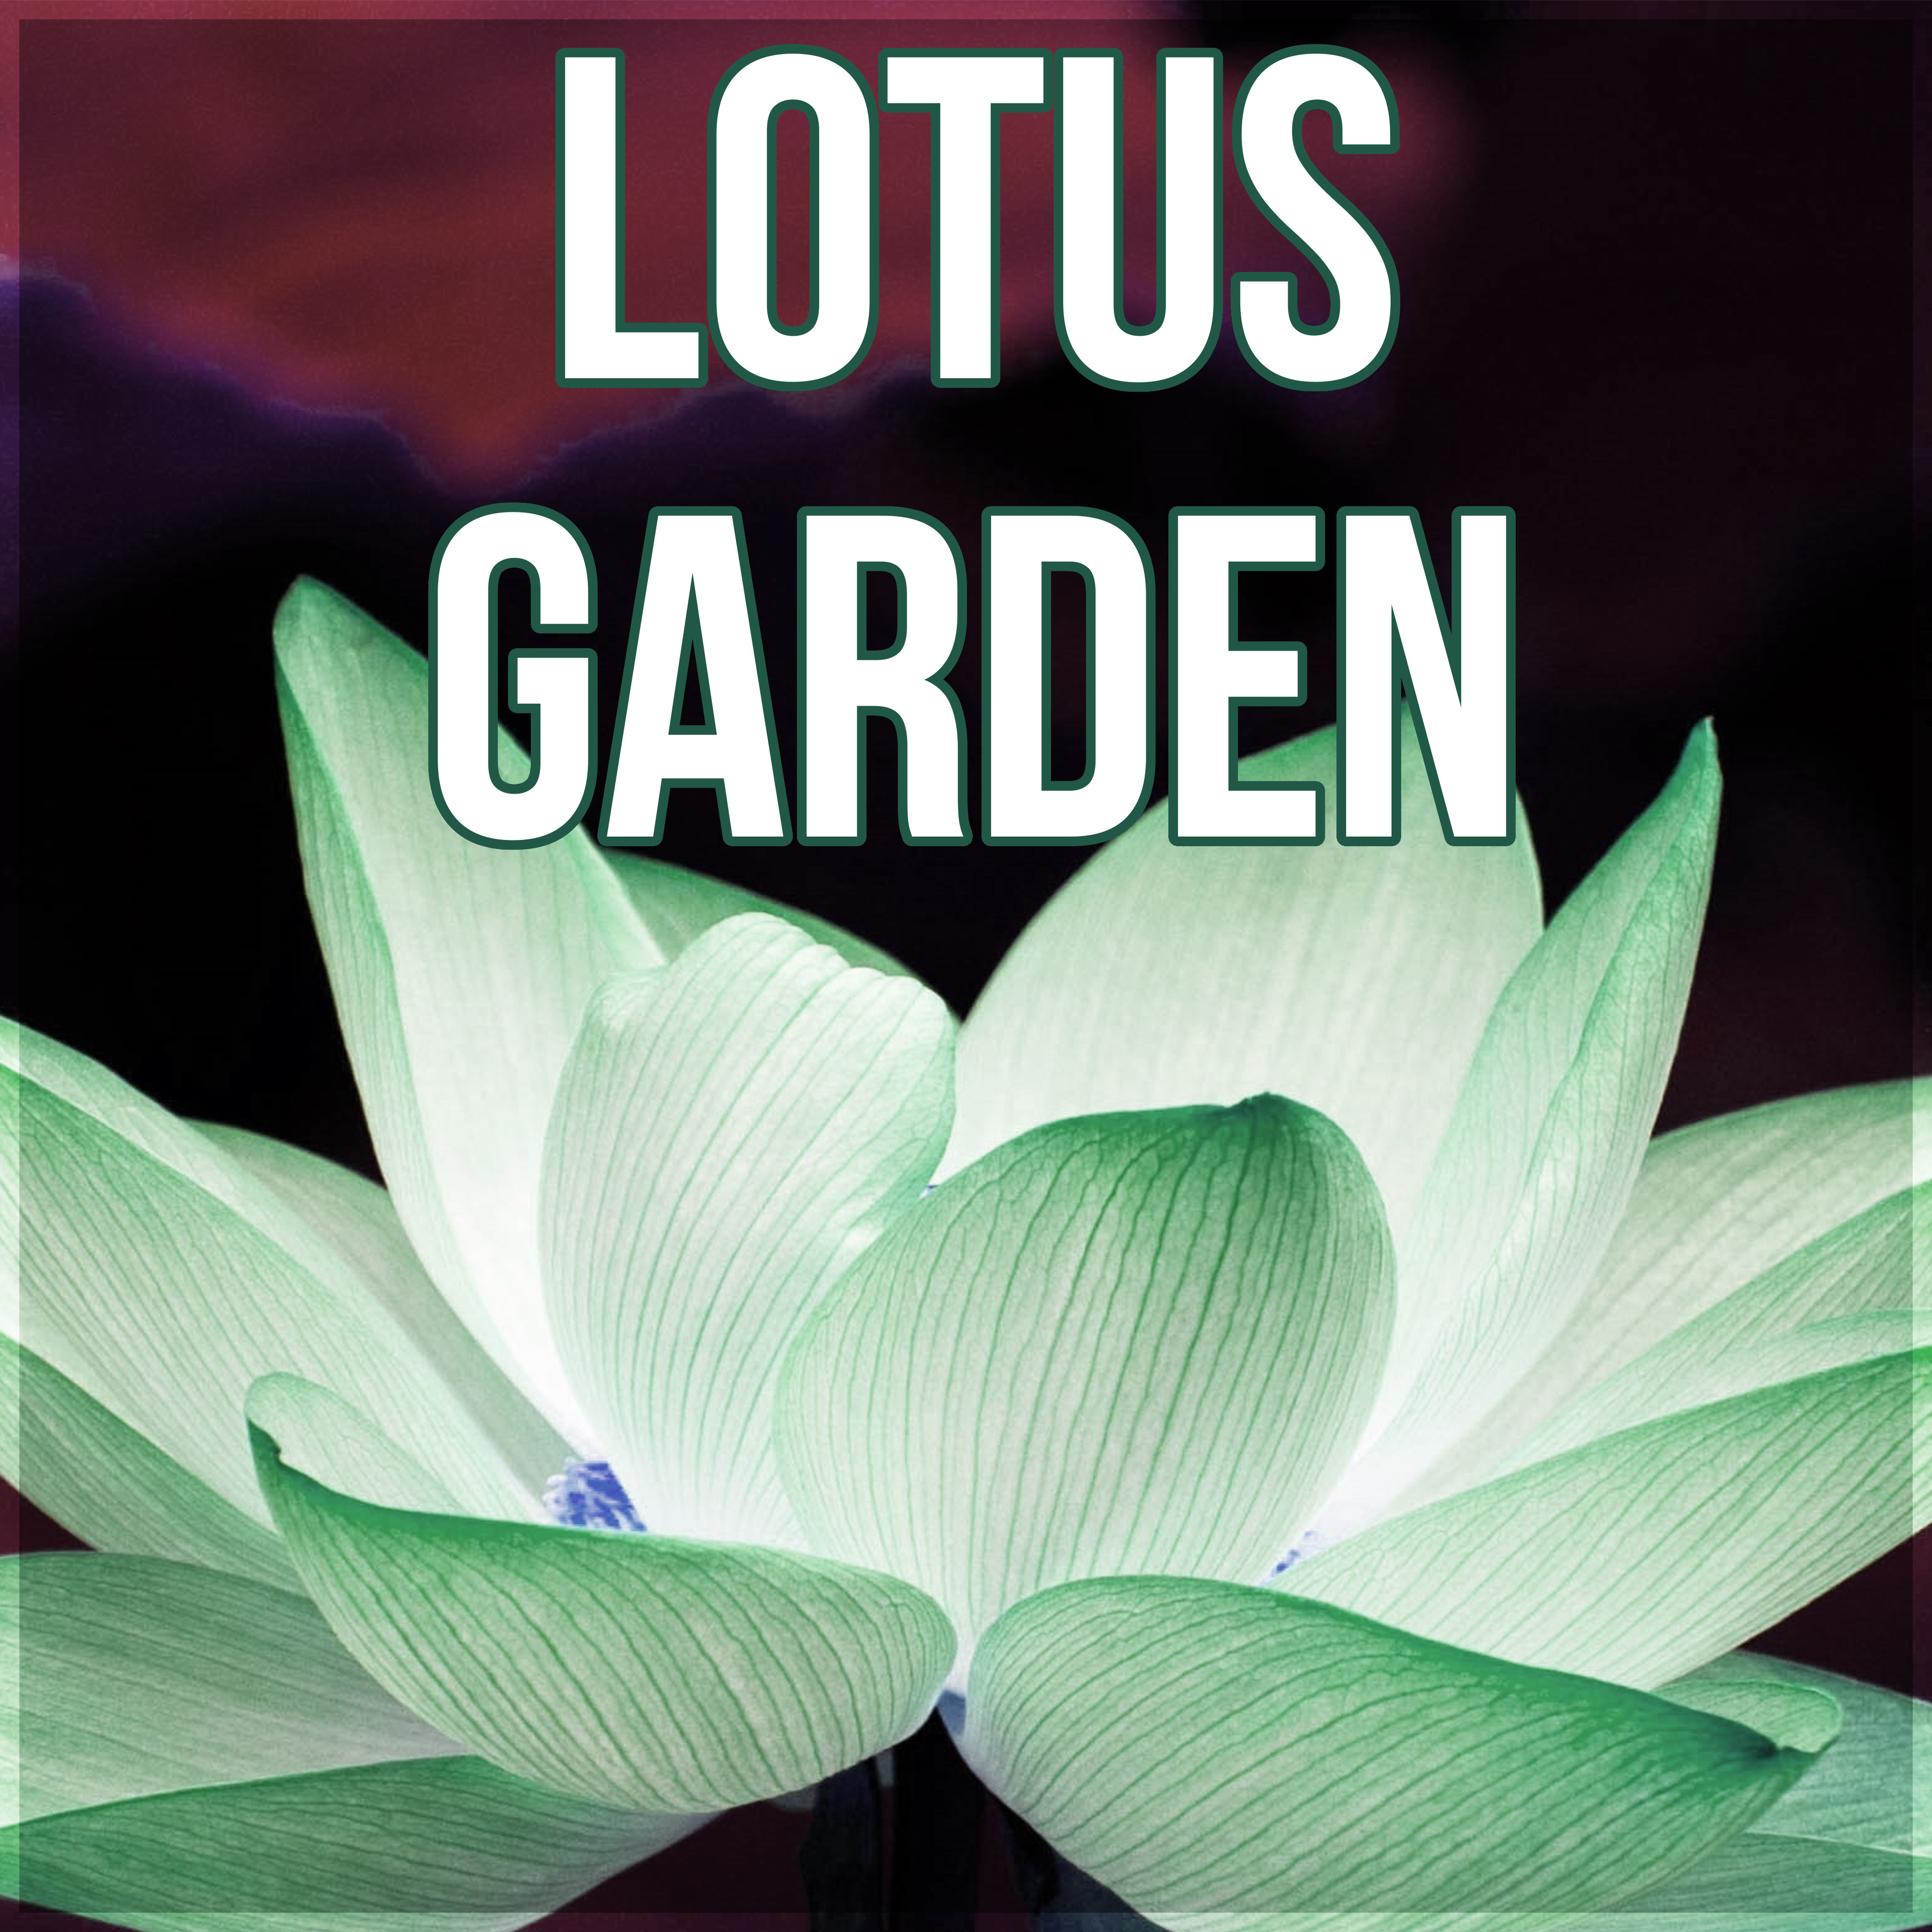 Lotus Garden - Luxury Spa, Elixir of Life, Relaxing Background Music for Spa the Wellness Center, Natural Music for Healing Through Sound and Touch, Tranquility Spa & Total Relax, Sensitive Massage